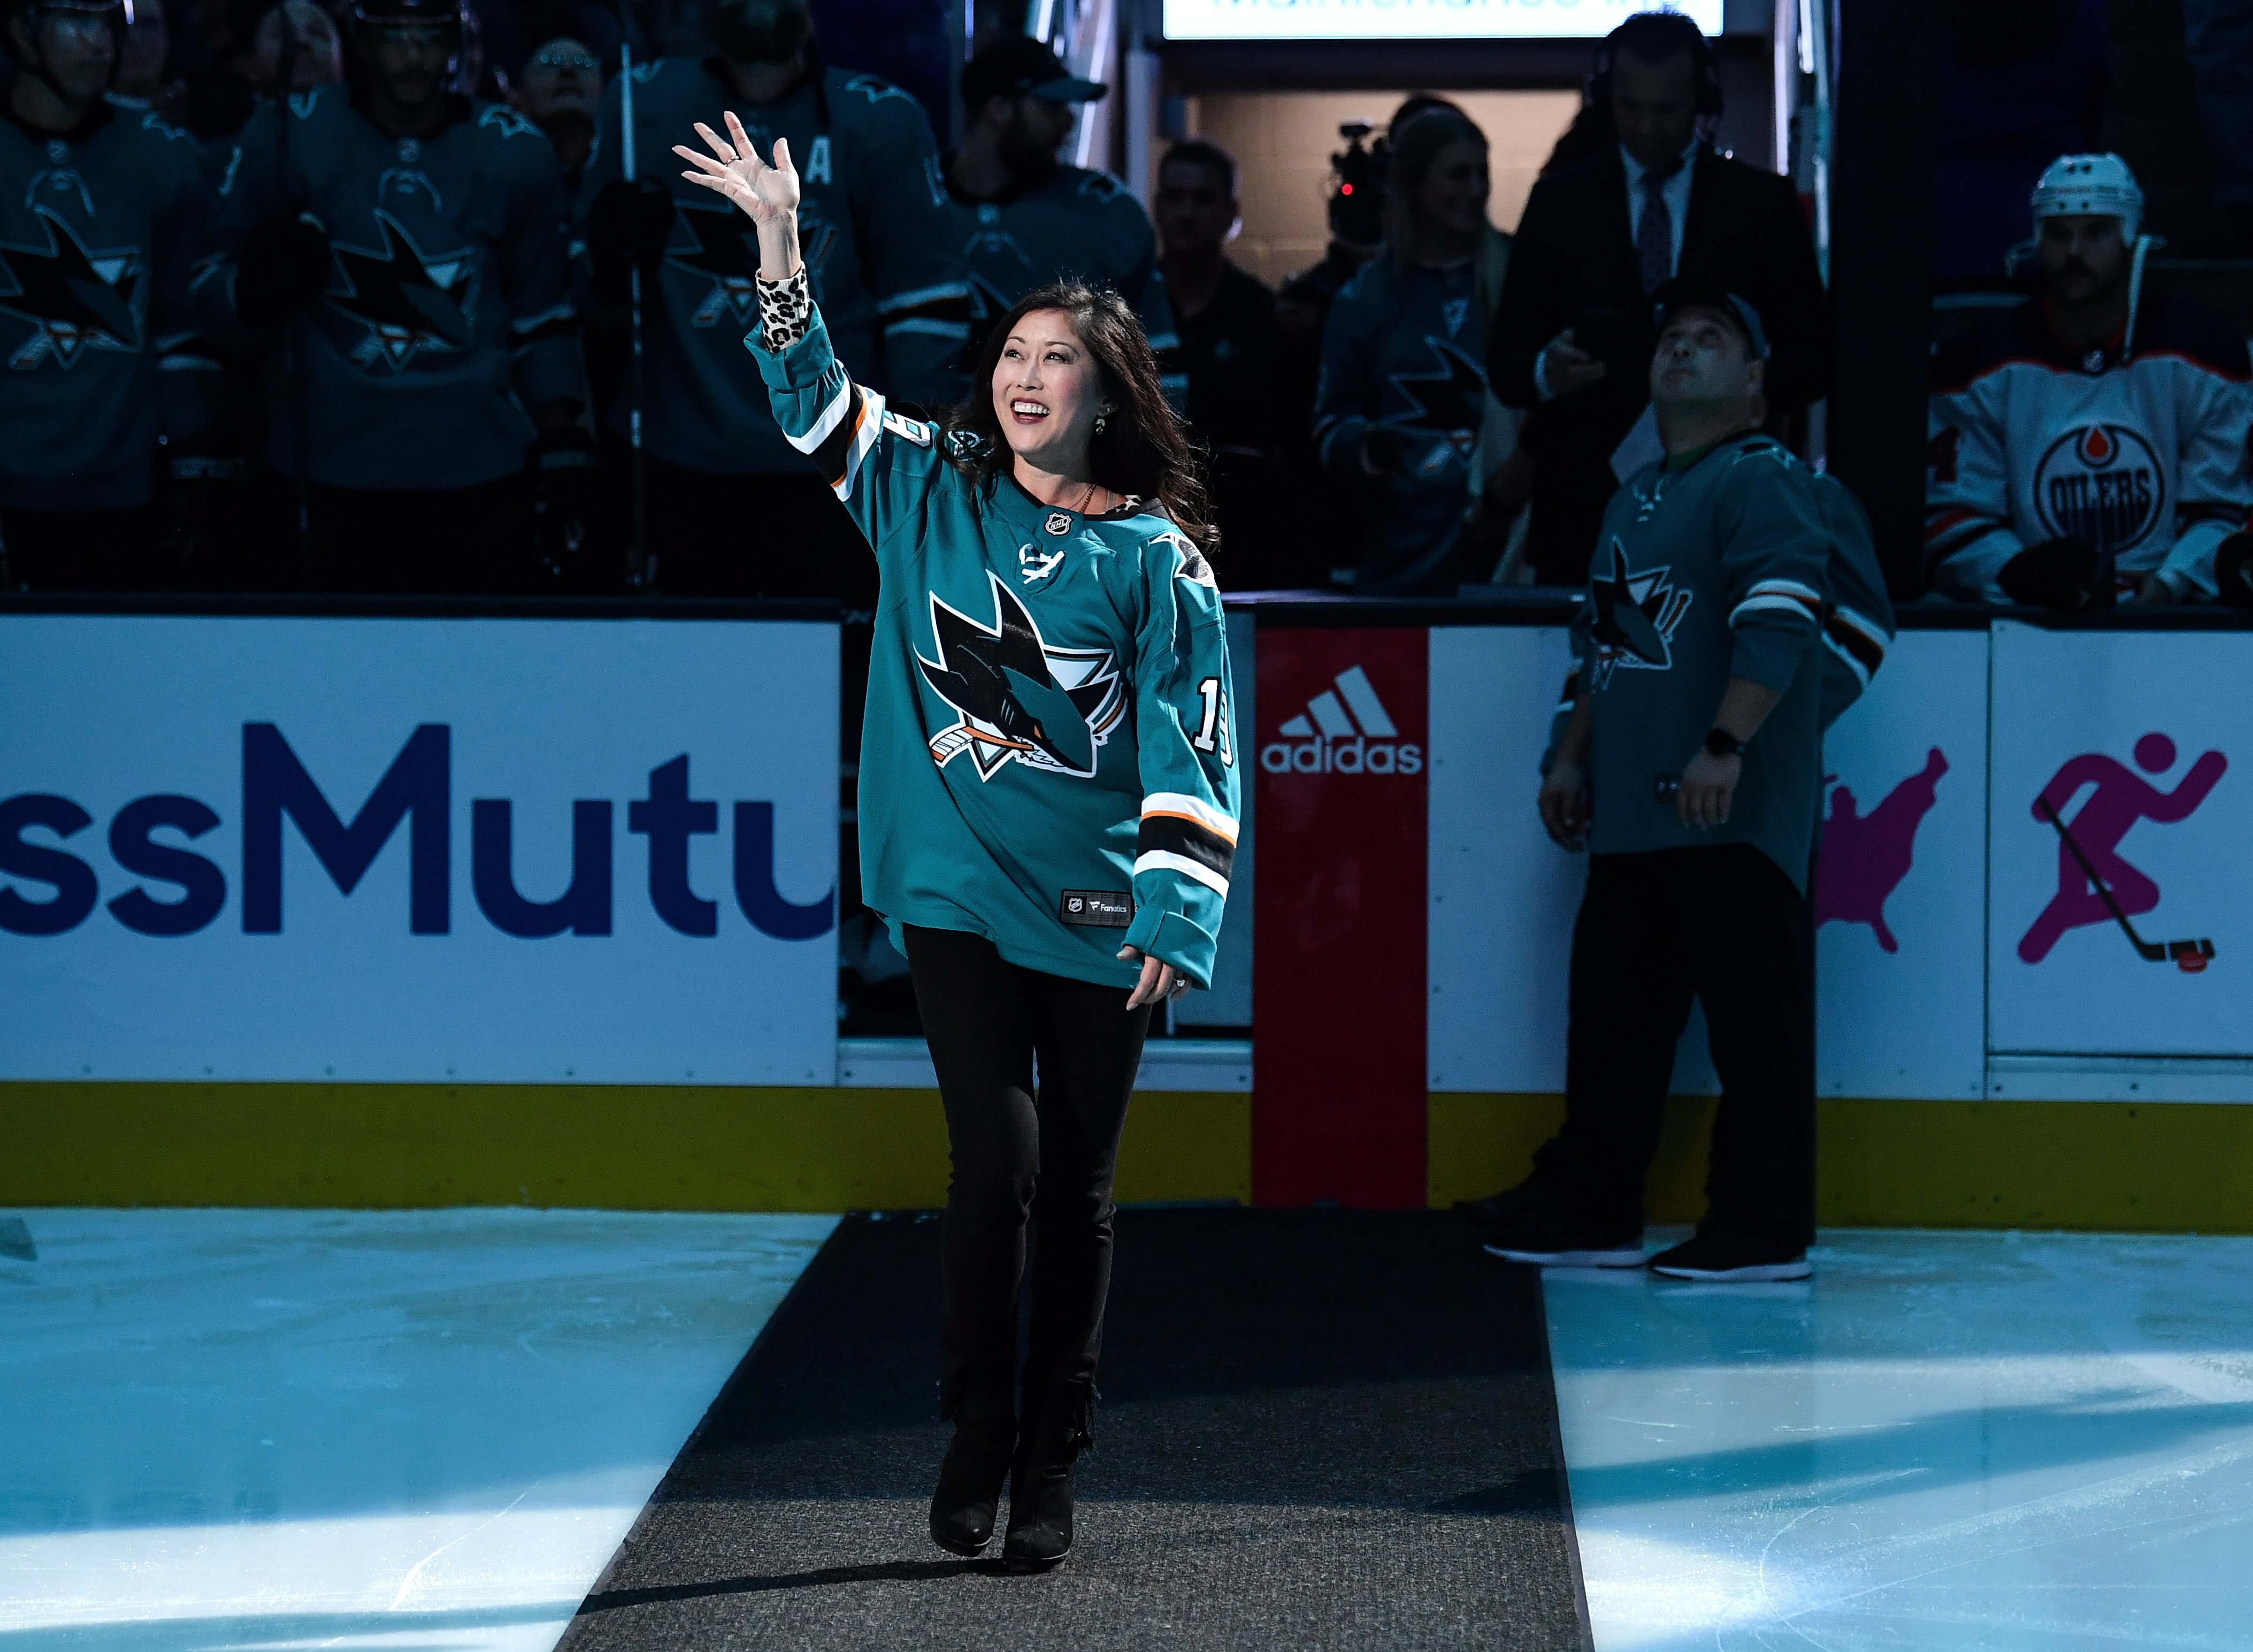  Kristi Yamaguchi comes out for the puck drop before the game between the San Jose Sharks and the Edmonton Oilers at SAP Center on November 19, 2019 in San Jose, California | Photo: GettyImages